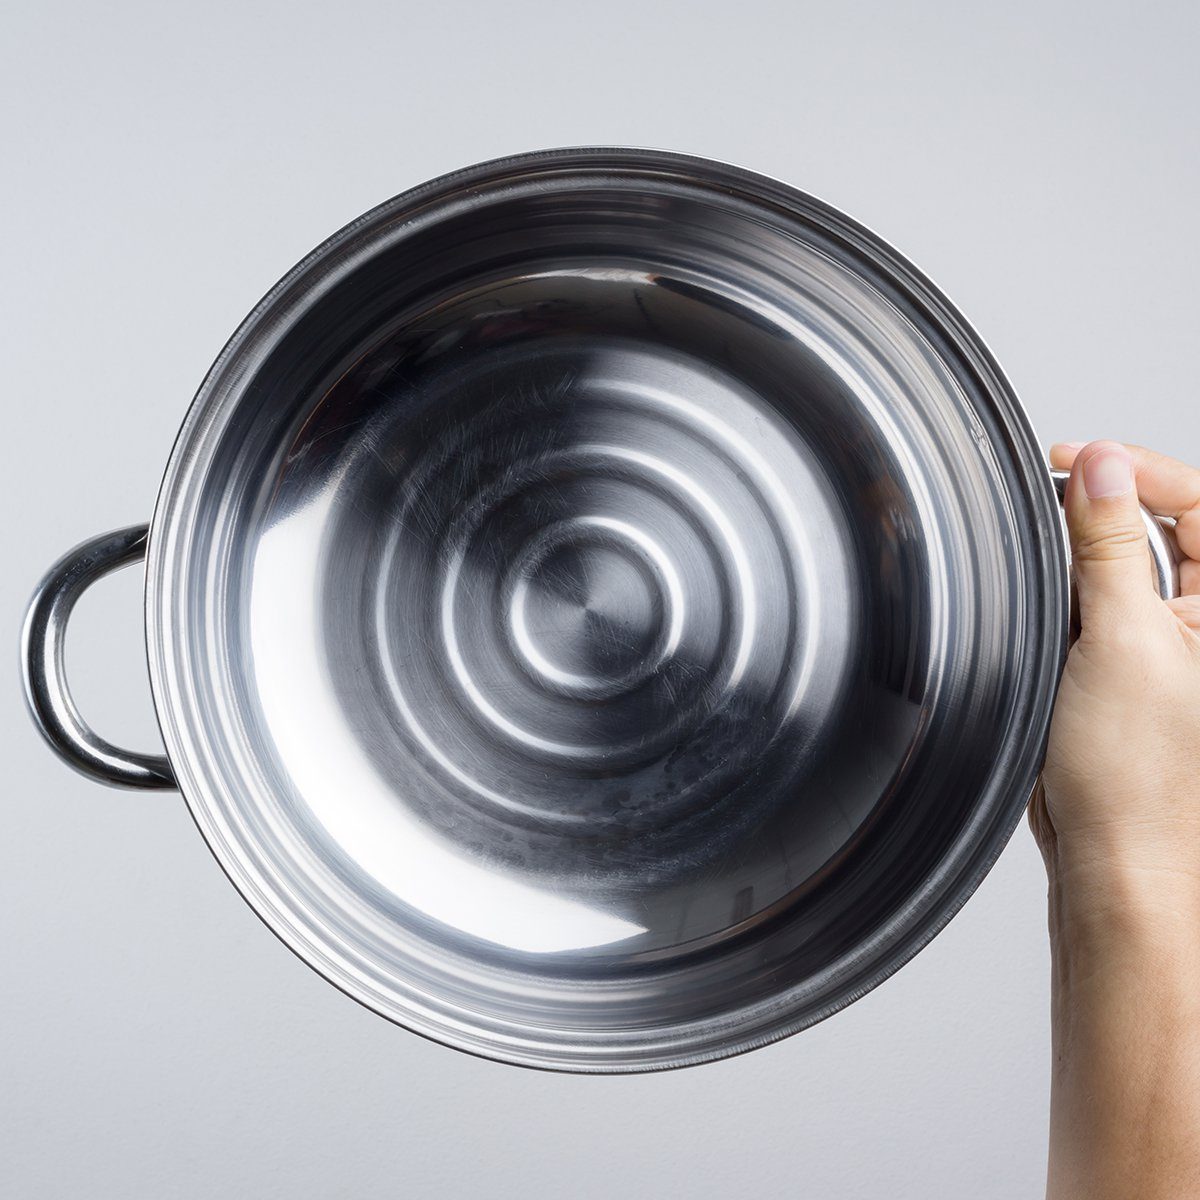 Hand holding stainless steel pan or wide pot on white background